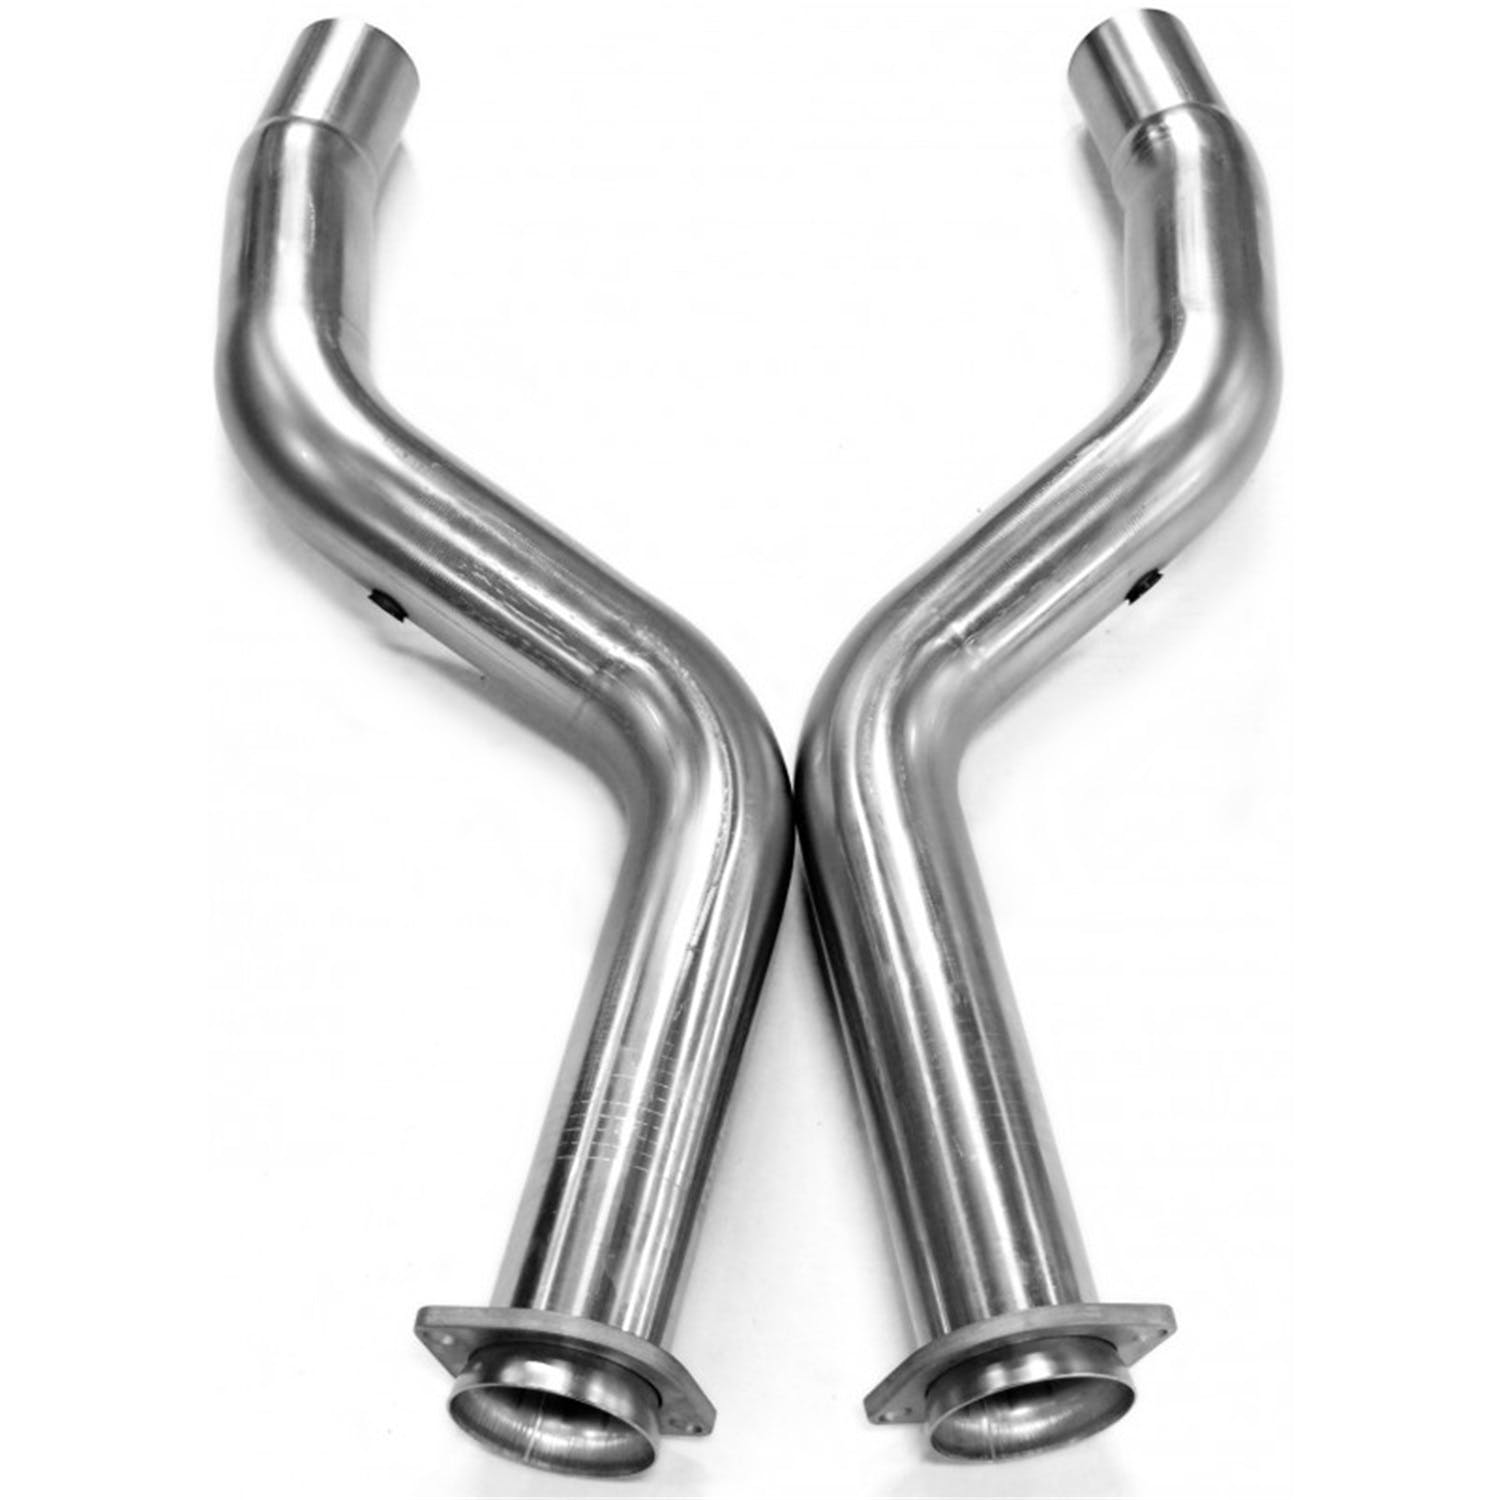 Kooks Custom Headers 31013100 Off Road Connection Pipes